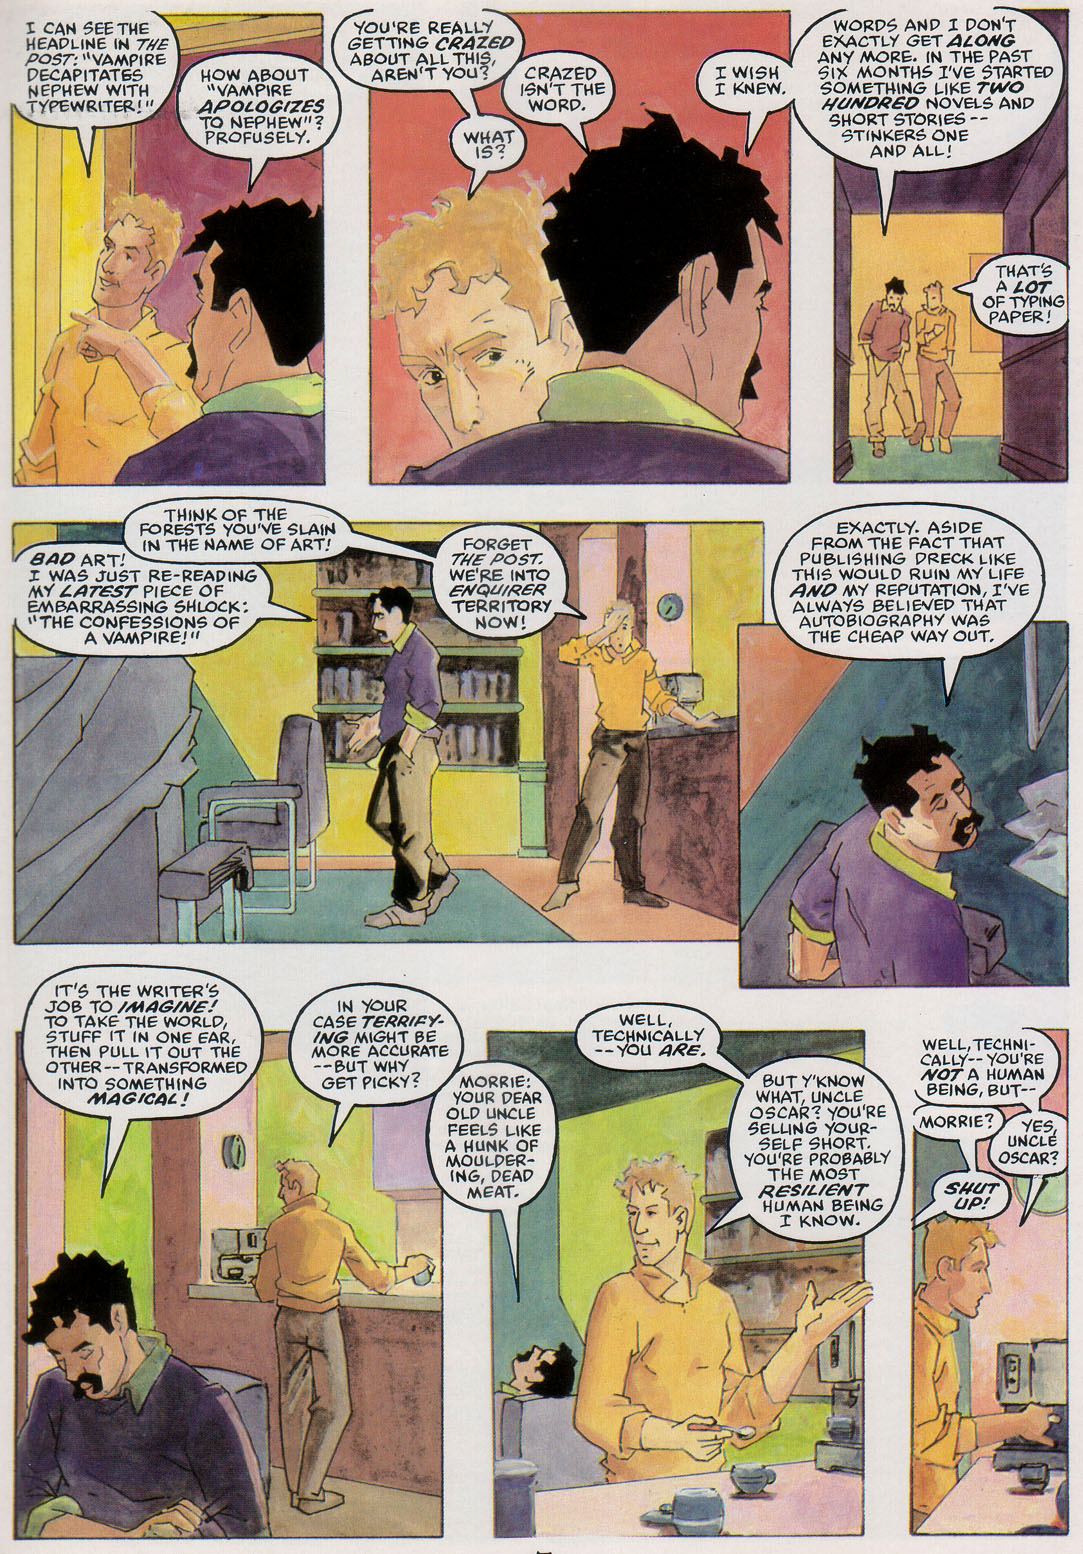 Marvel Graphic Novel issue 20 - Greenberg the Vampire - Page 11